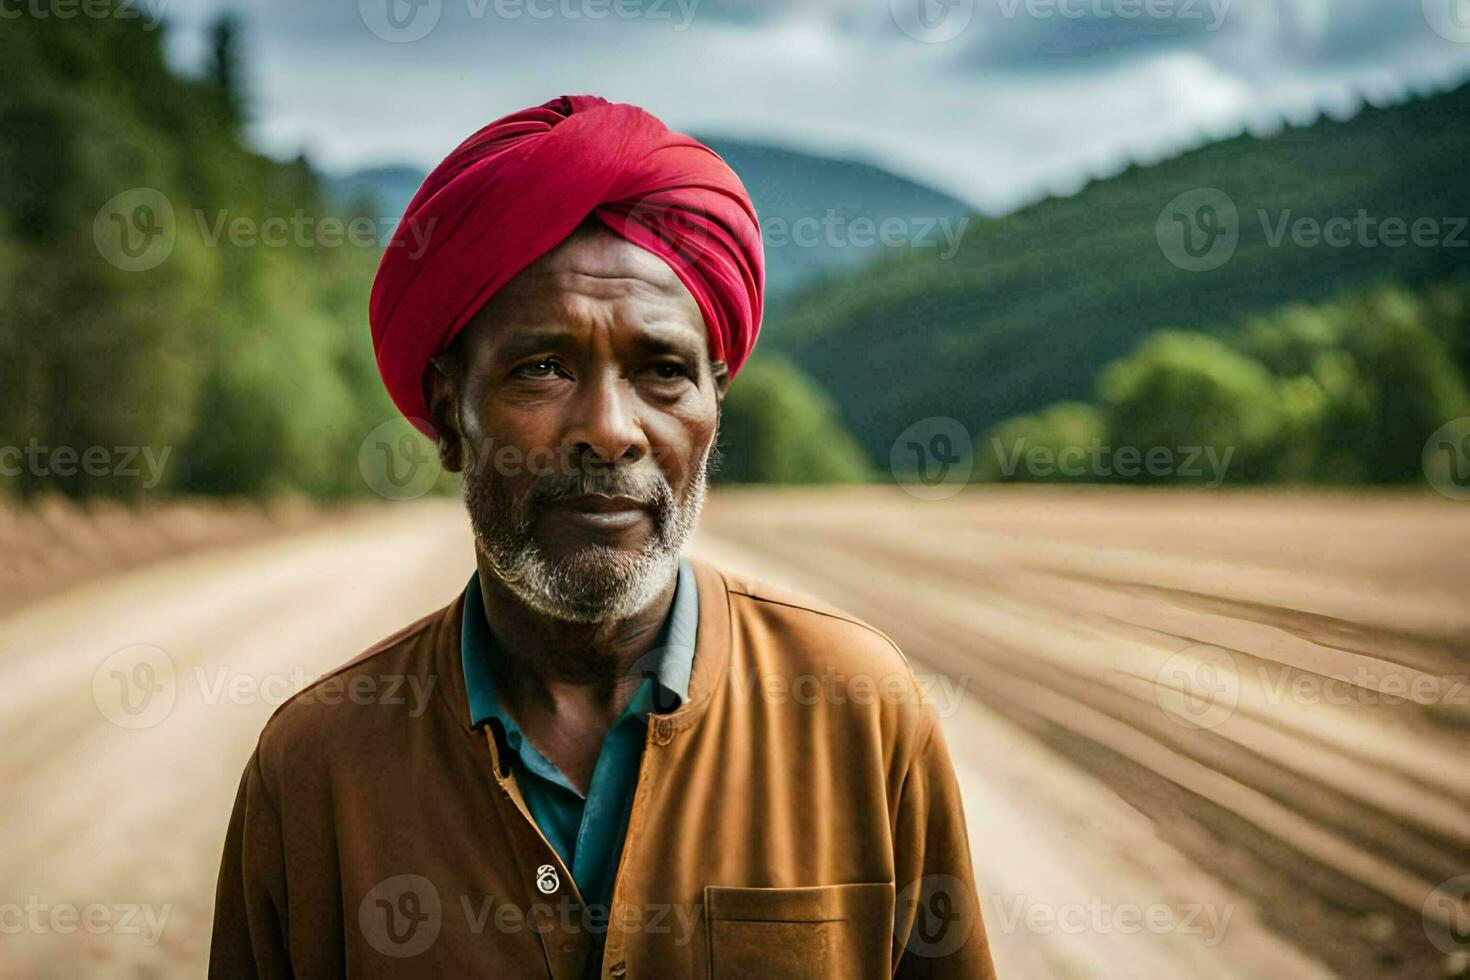 https://static.vecteezy.com/system/resources/previews/030/874/077/non_2x/an-african-man-wearing-a-red-turban-stands-on-a-dirt-road-ai-generated-photo.jpg